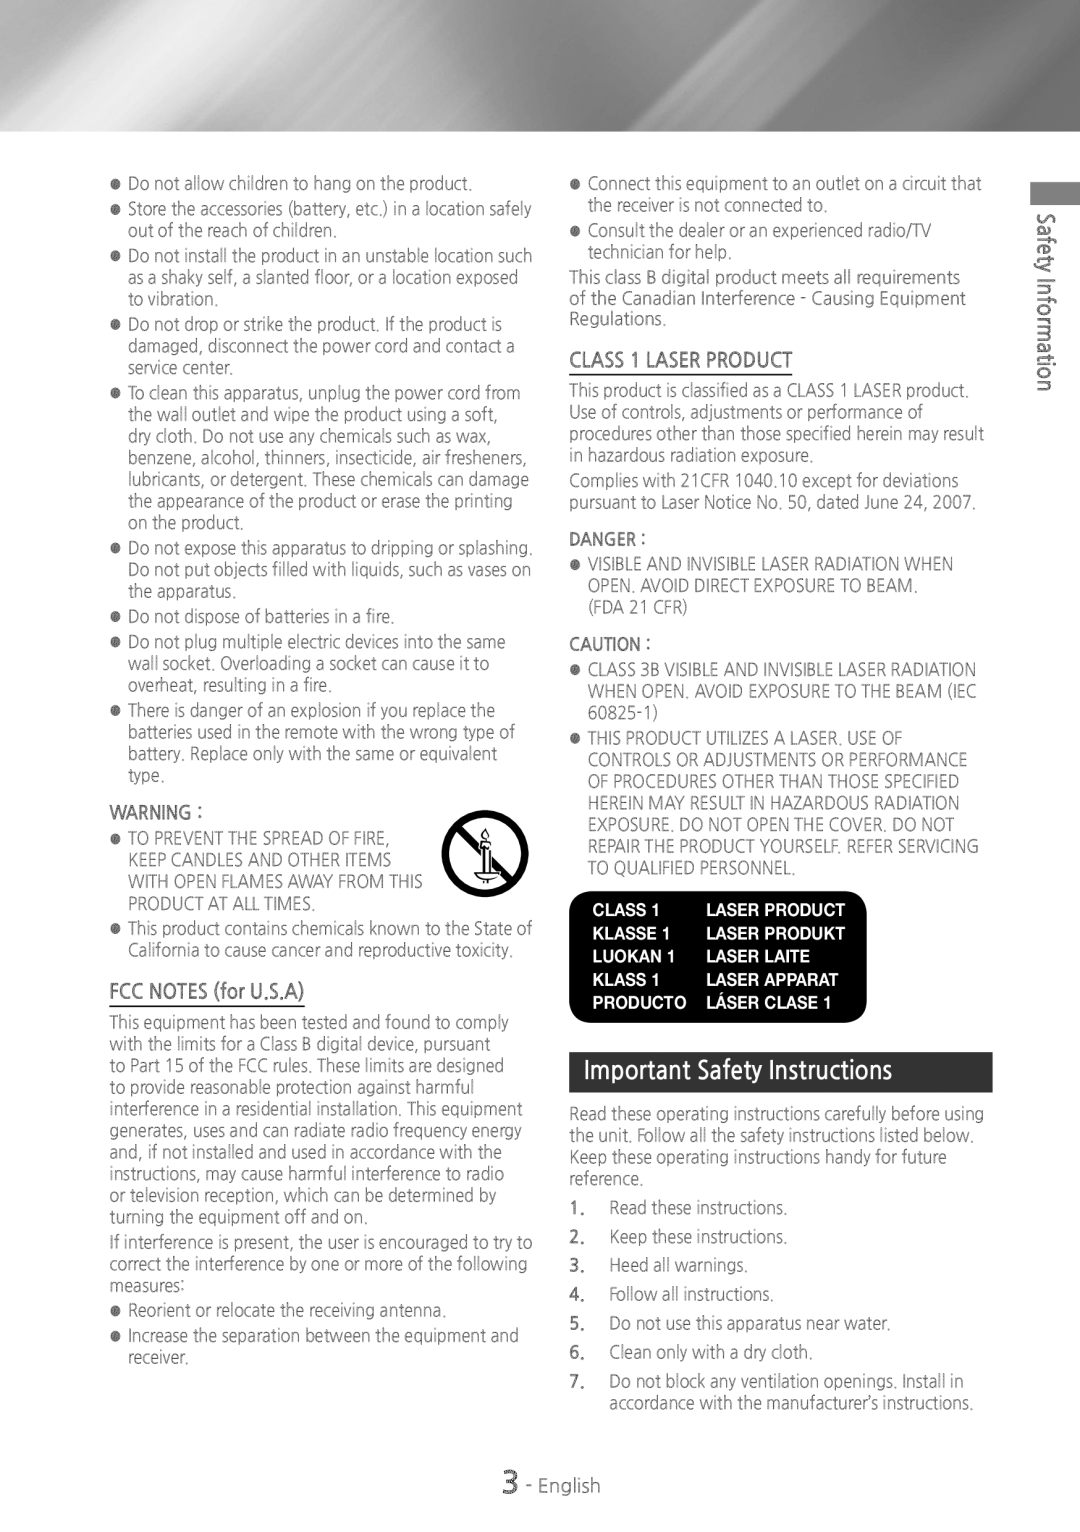 Samsung HTH5500 Important Safety Instructions, FCC NOTES for U.S.A, CLASS 1 LASER product, Safety Information, Class 